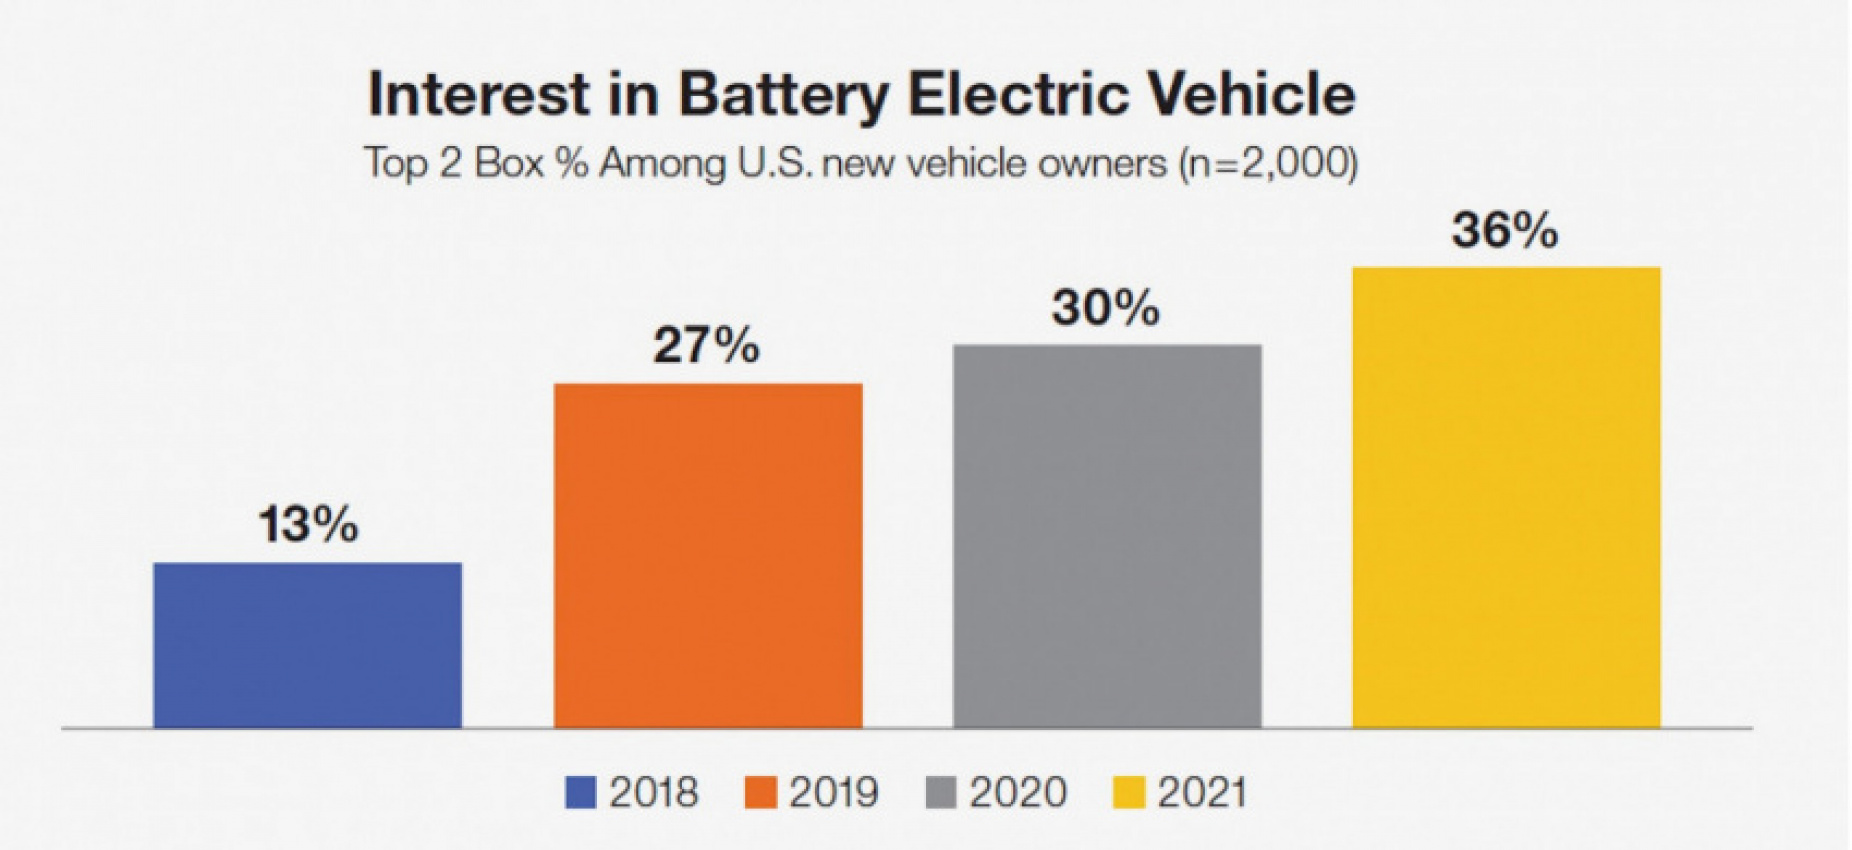 autos, electric vehicle, reviews, fuel prices are attracting interest in electric vehicles, and are approaching the turning point, a study reveals